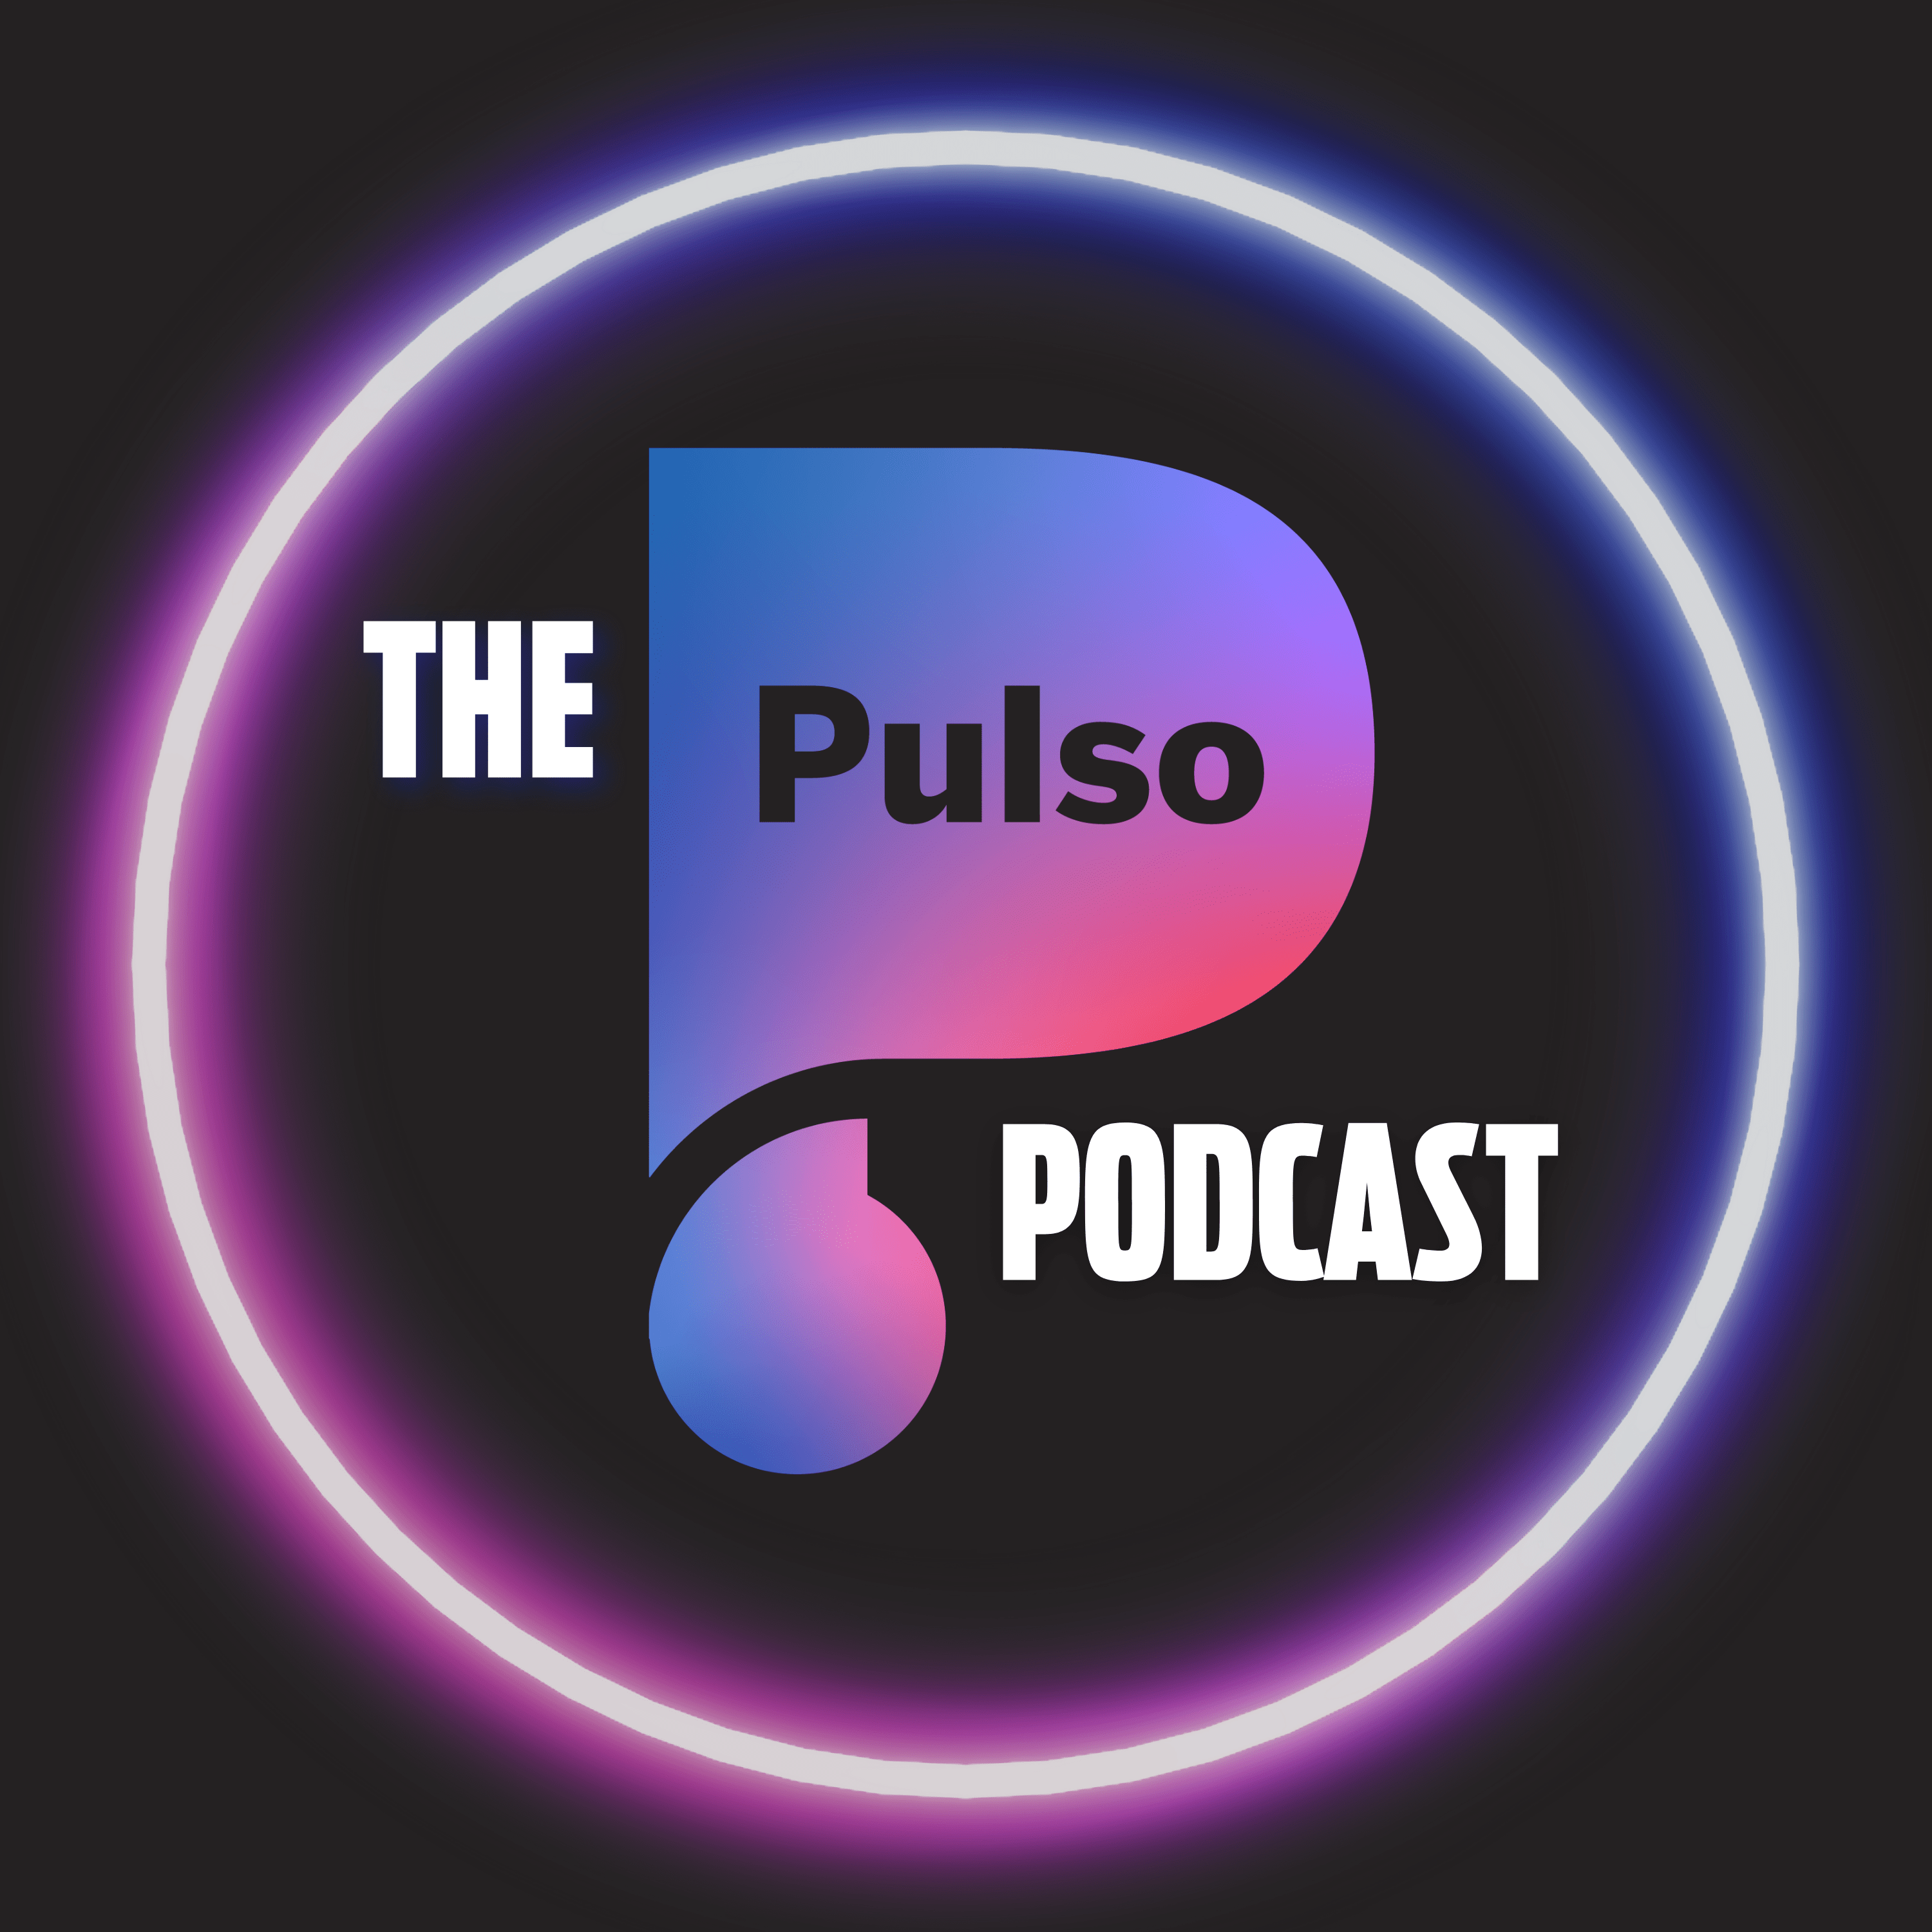 Artwork for podcast The Pulso Podcast